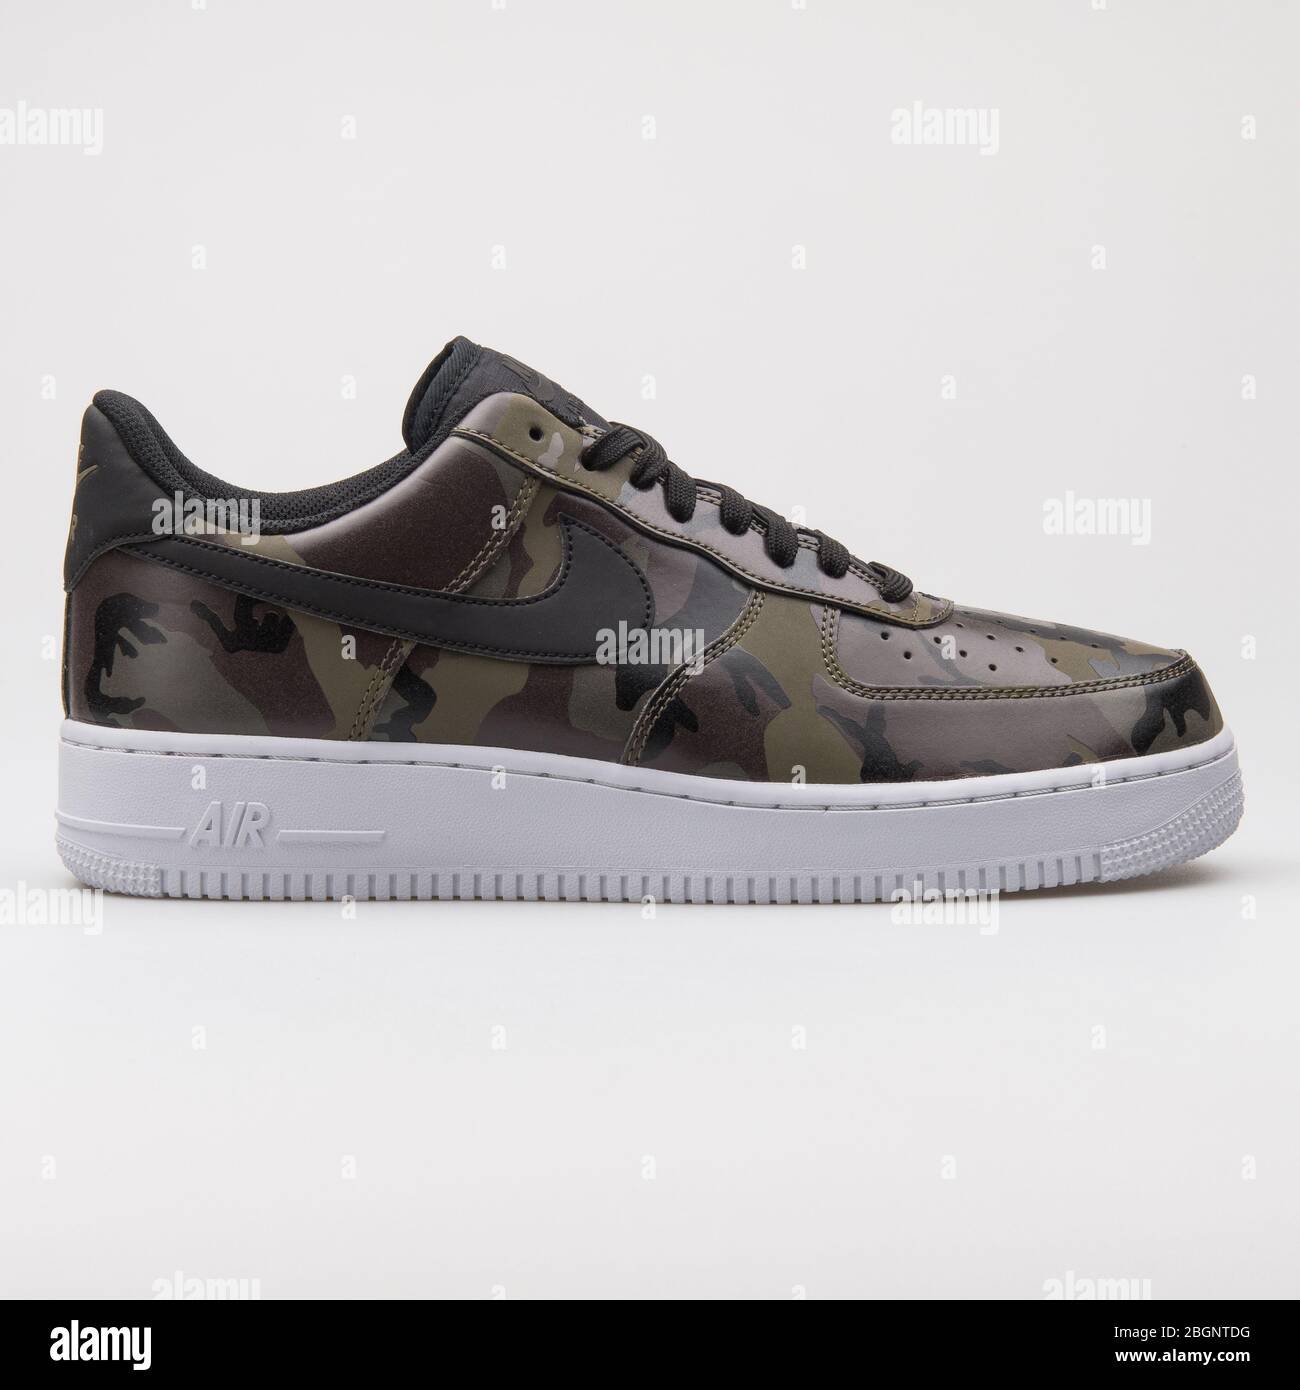 VIENNA, AUSTRIA - AUGUST 24, 2017: Nike Air Force 1 07 LV8 olive and black  camo sneaker on white background Stock Photo - Alamy